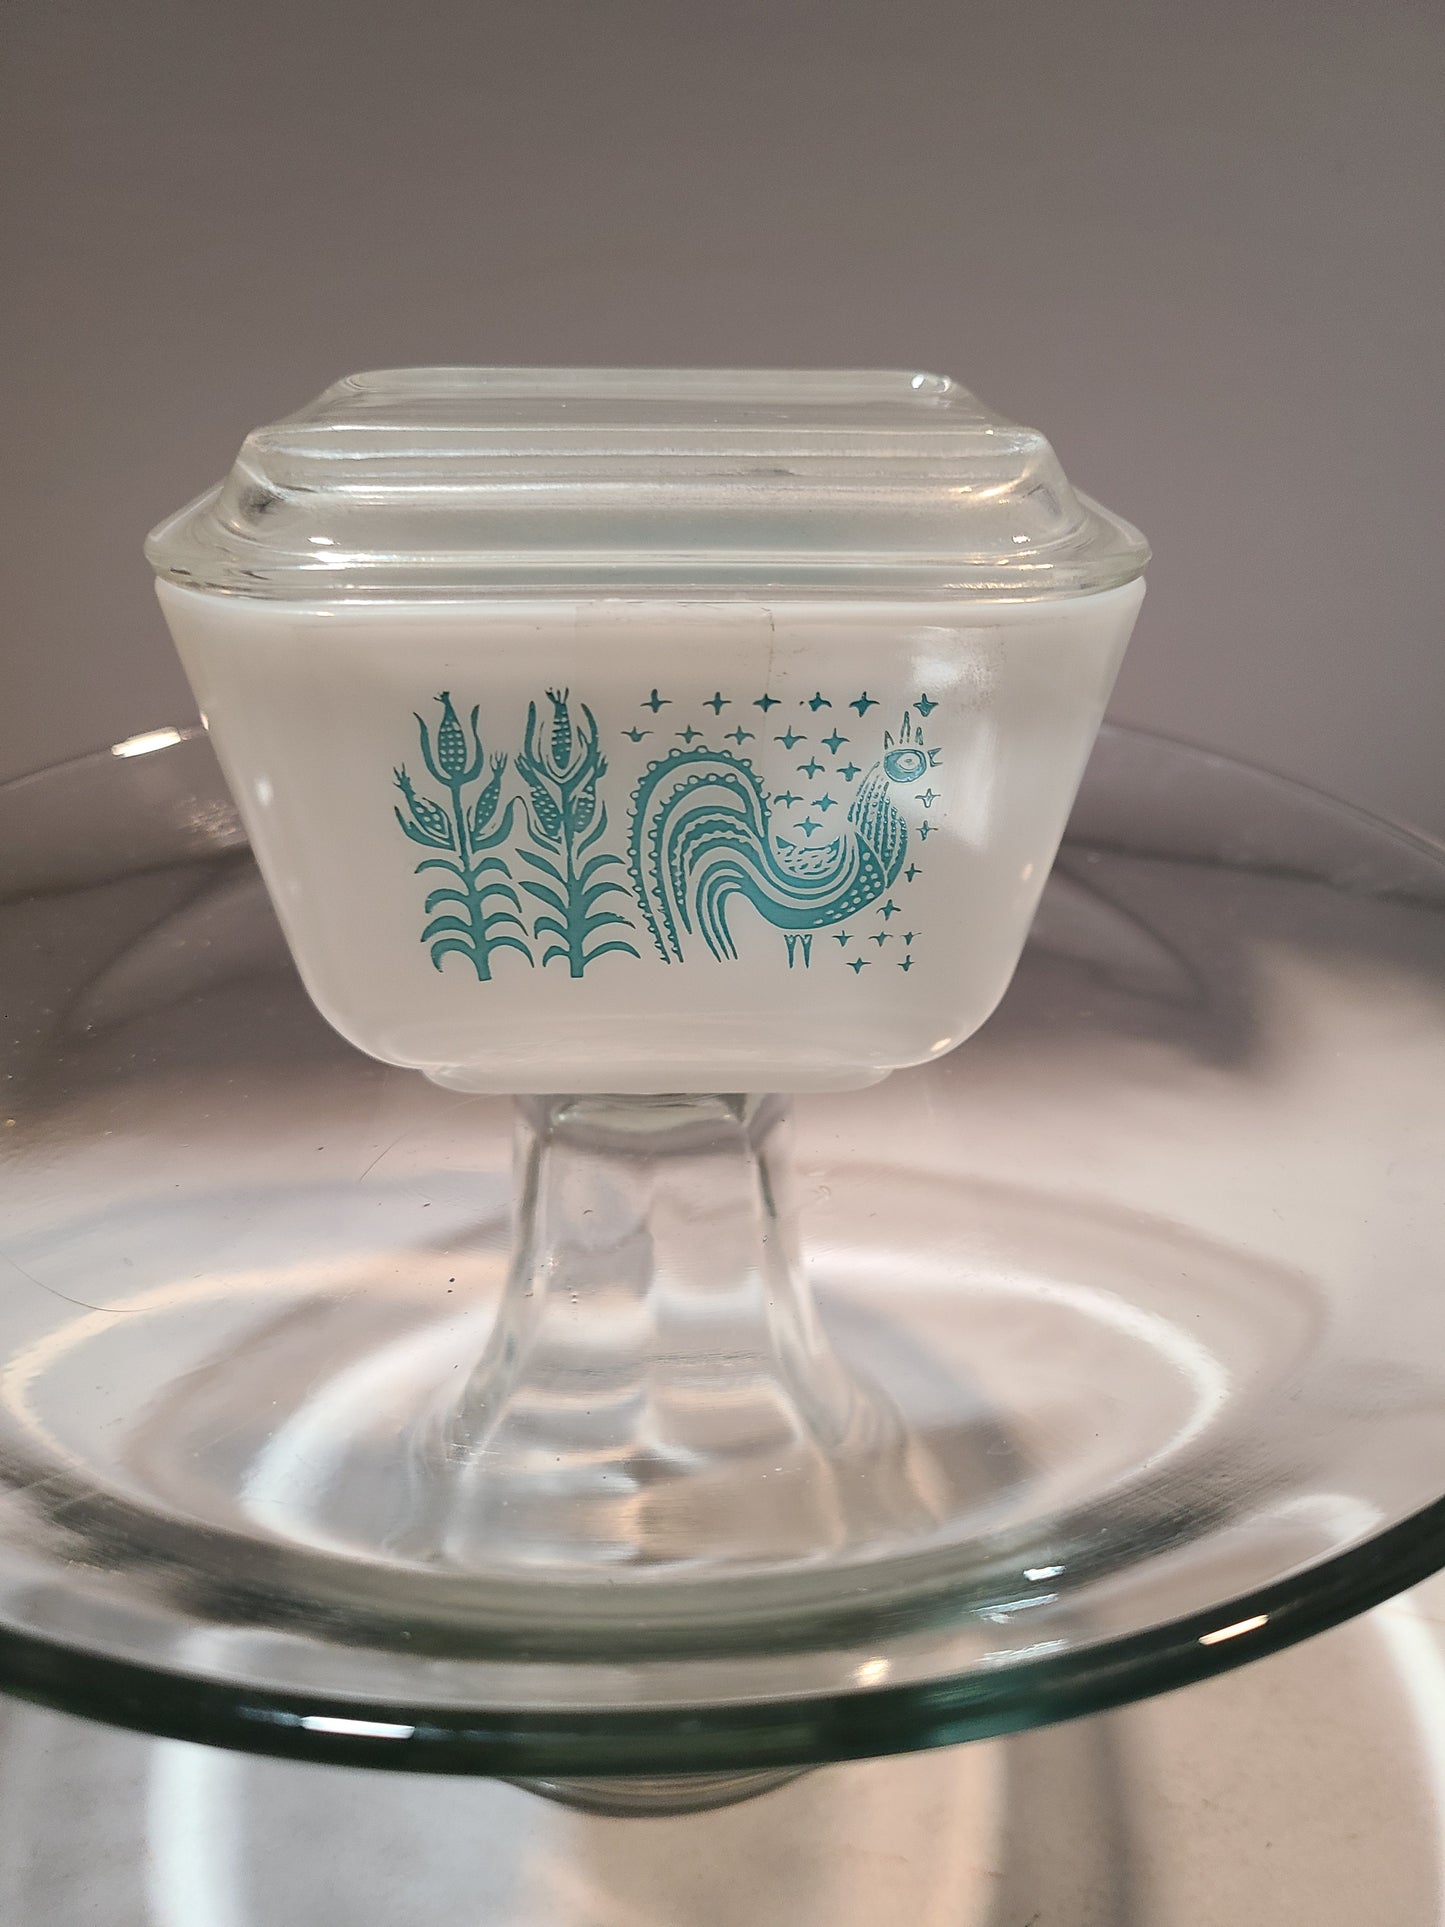 Pyrex Amish Butterprint refrigerator dishes